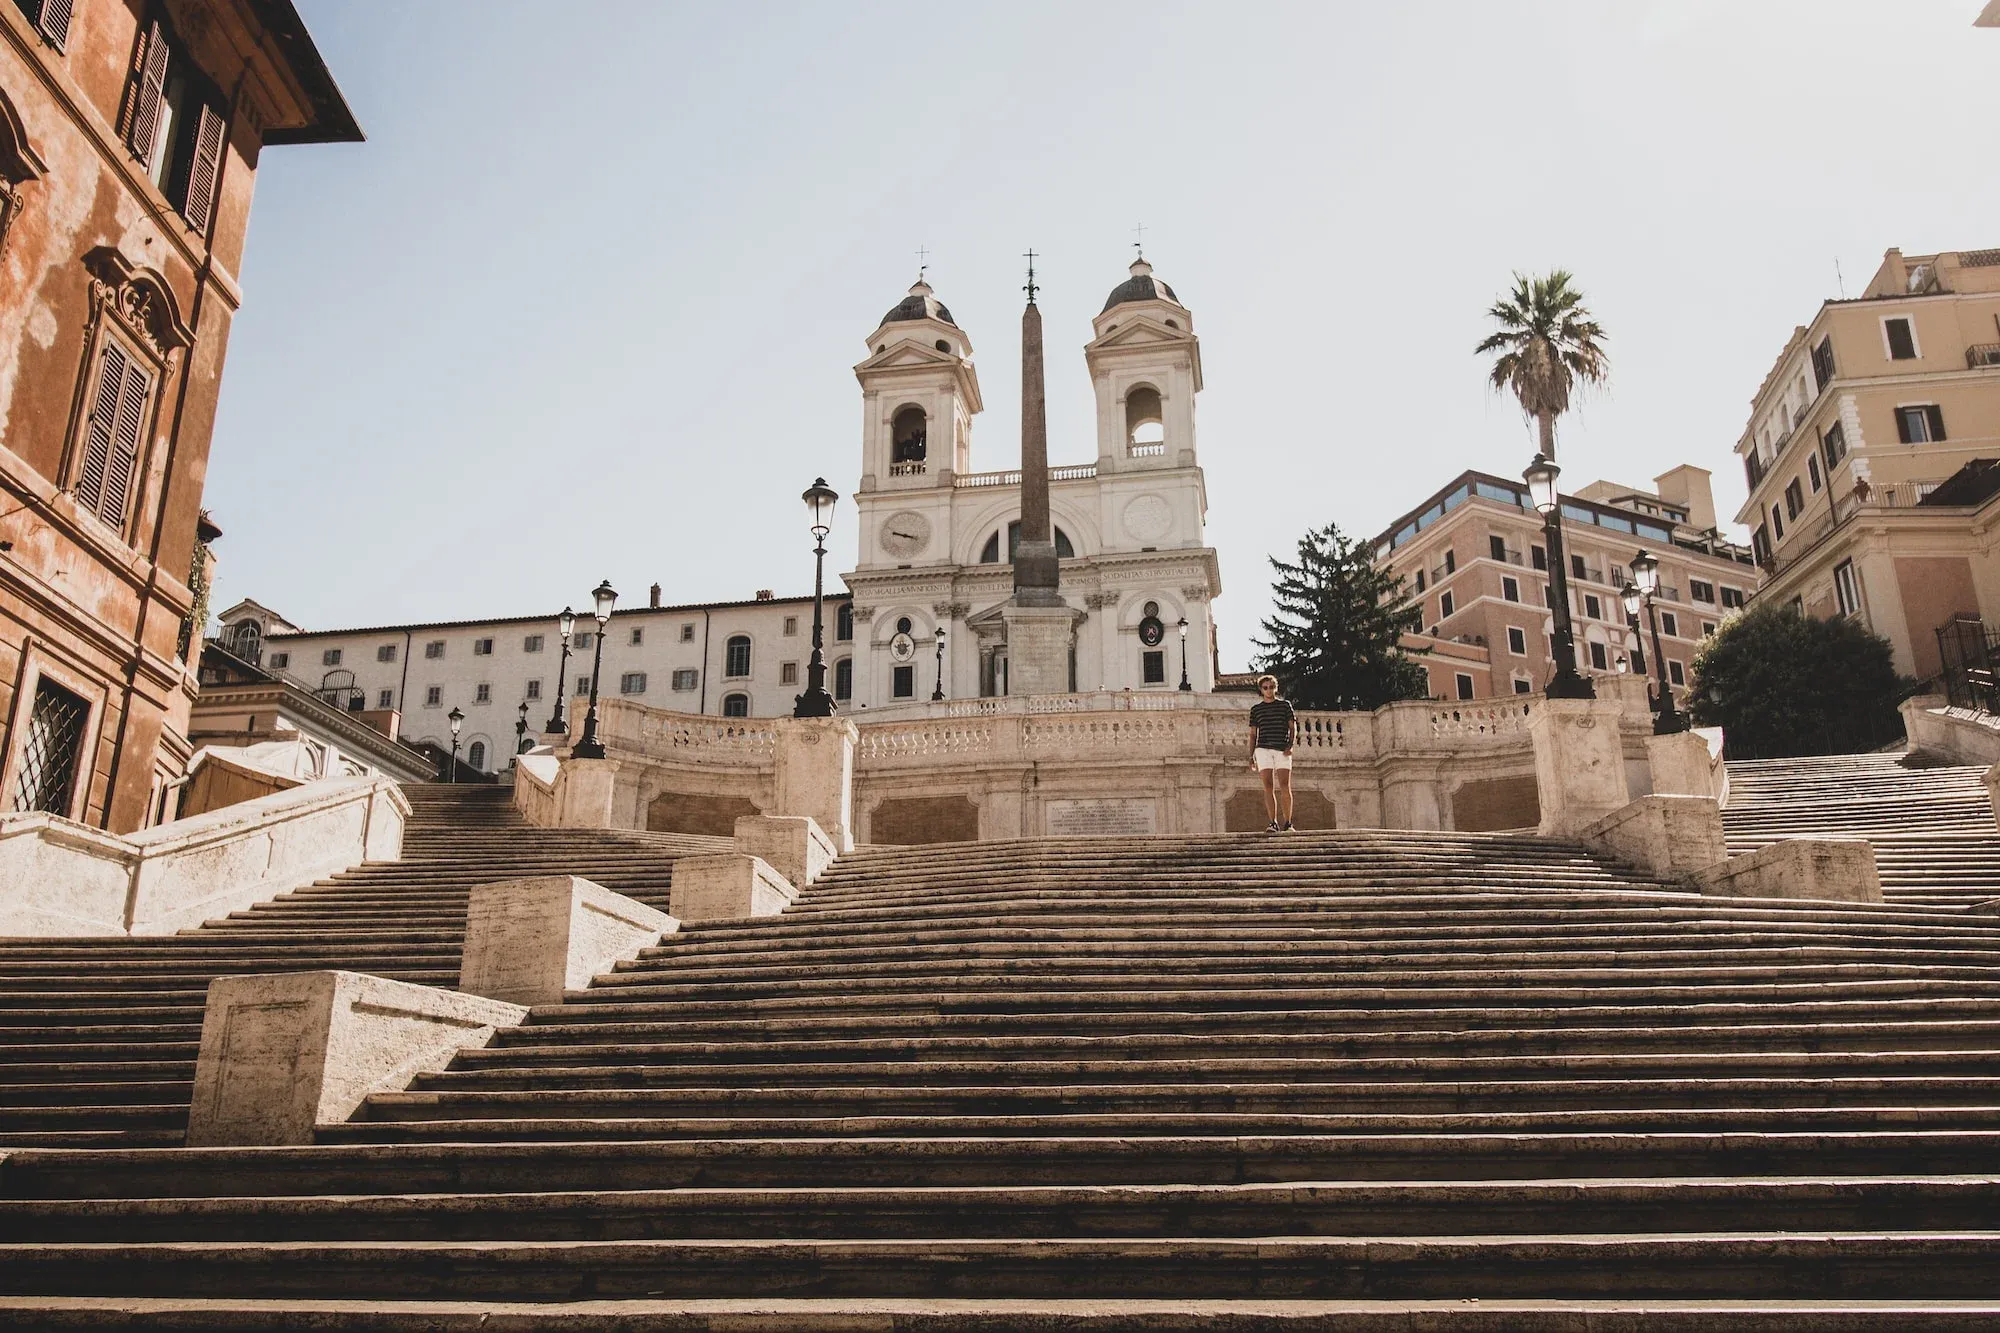 Image of the Spanish Steps in Rome, Italy